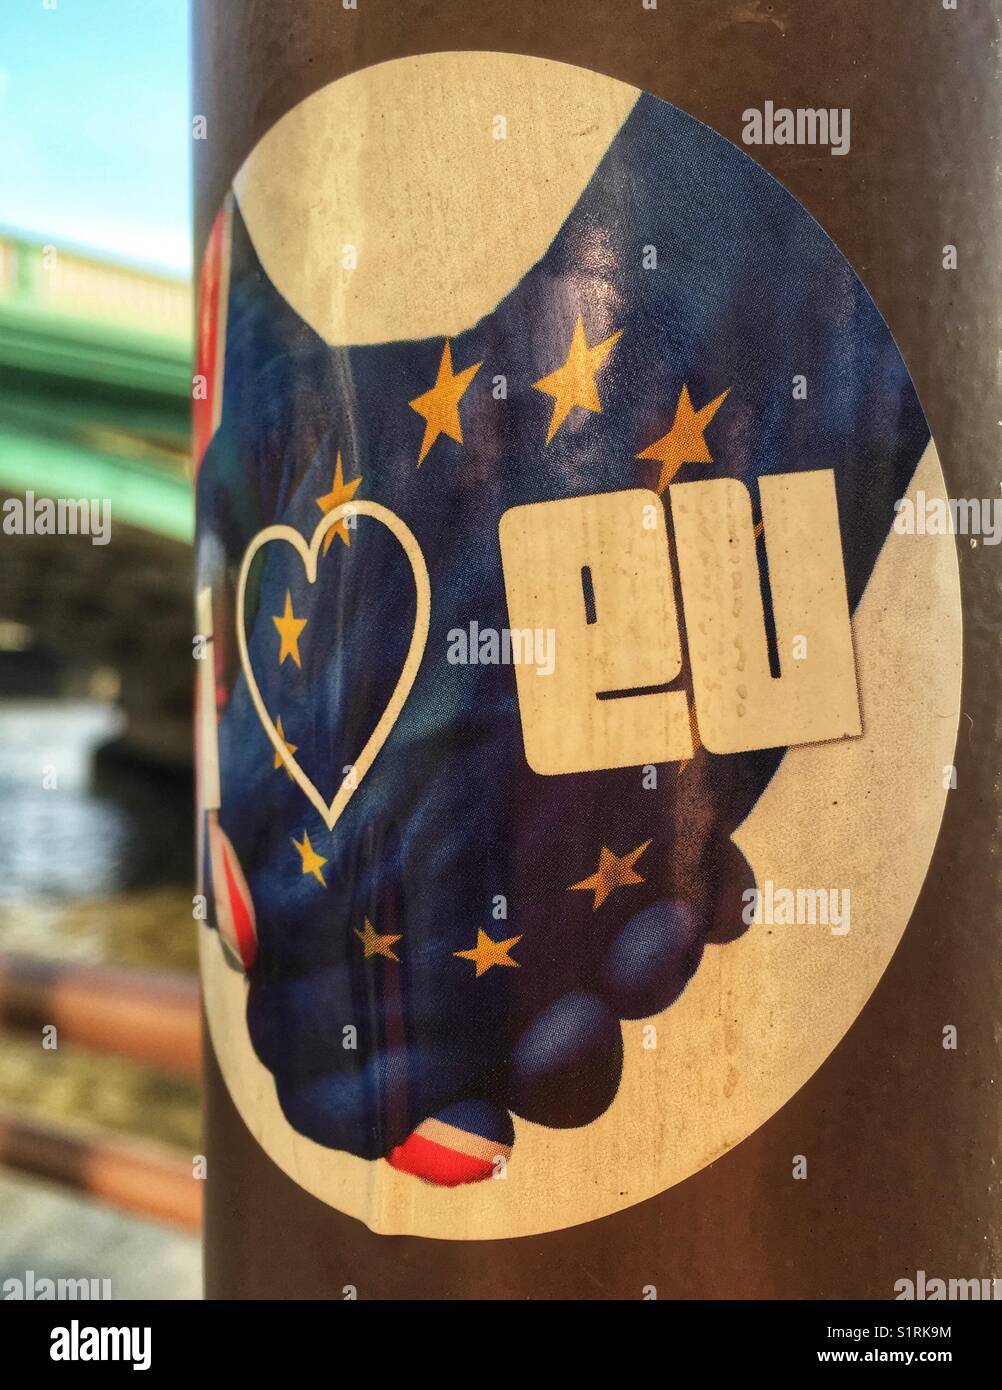 An I love EU sticker on a lamp post in London, England Stock Photo